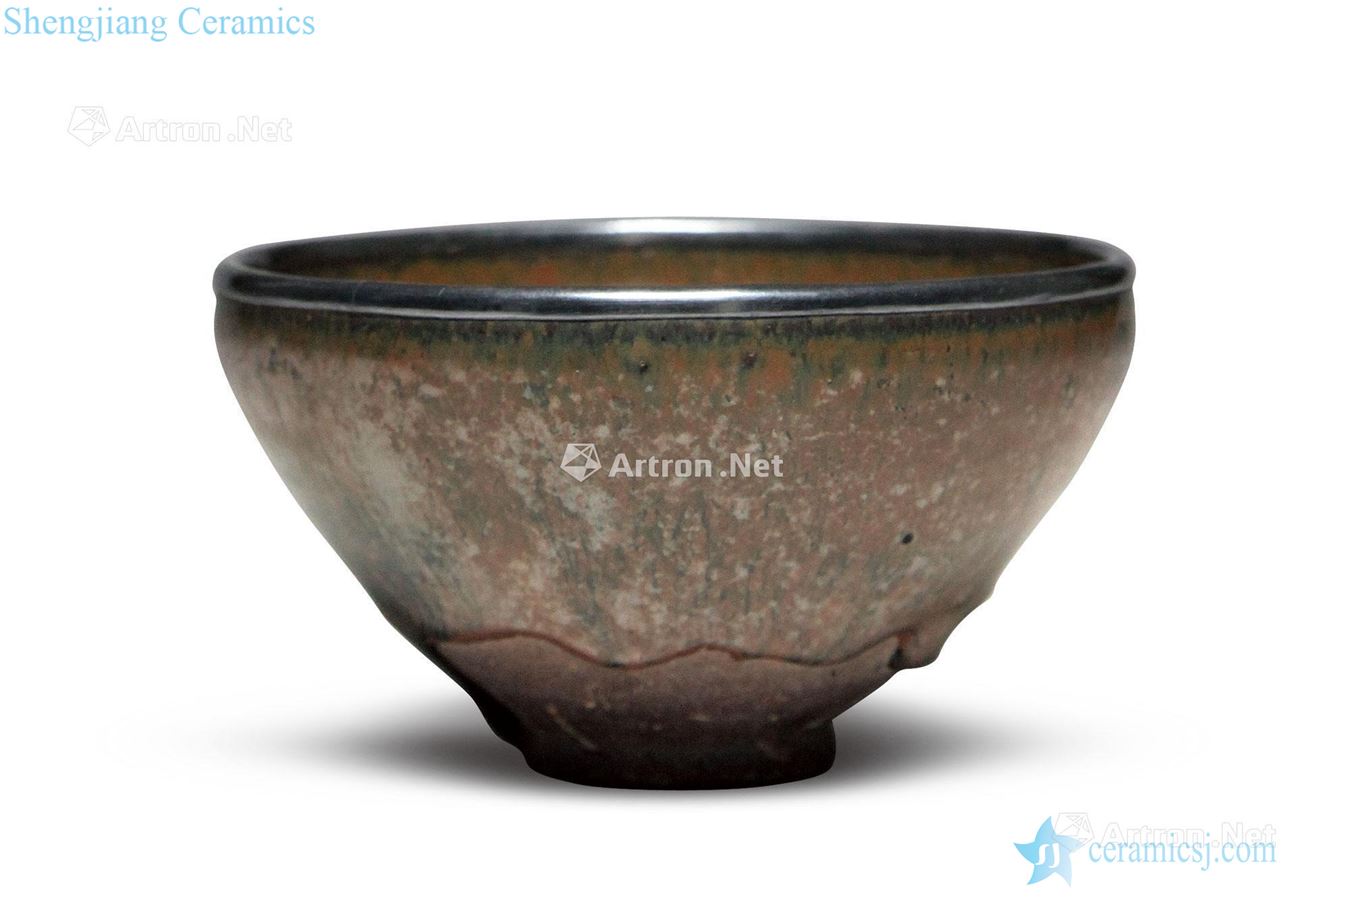 The southern song dynasty temmoku bowl